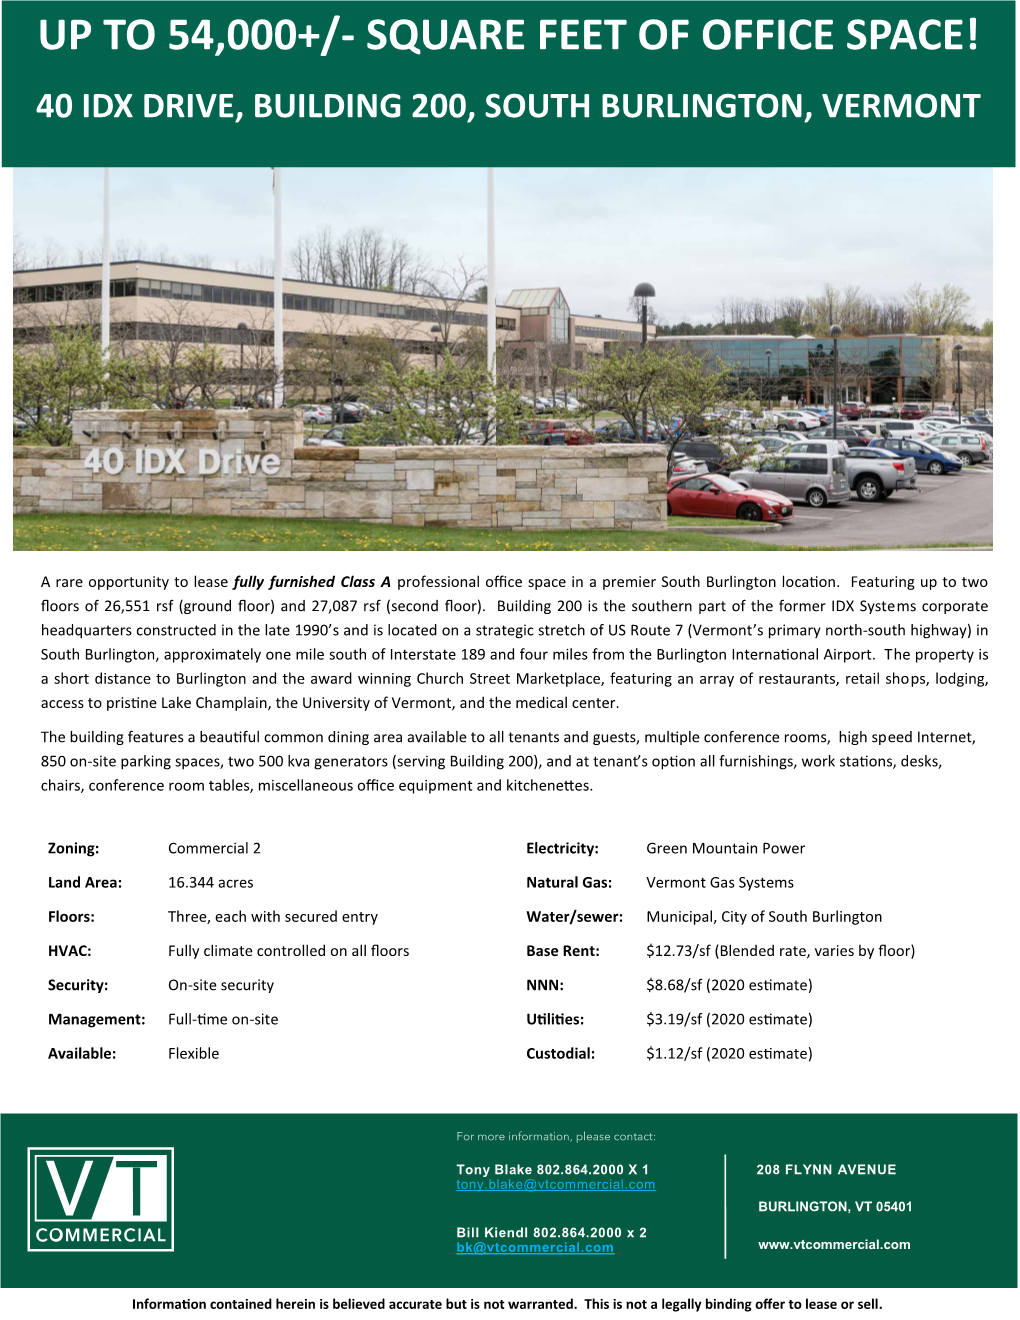 Up to 54,000+/- Square Feet of Office Space! 40 Idx Drive, Building 200, South Burlington, Vermont